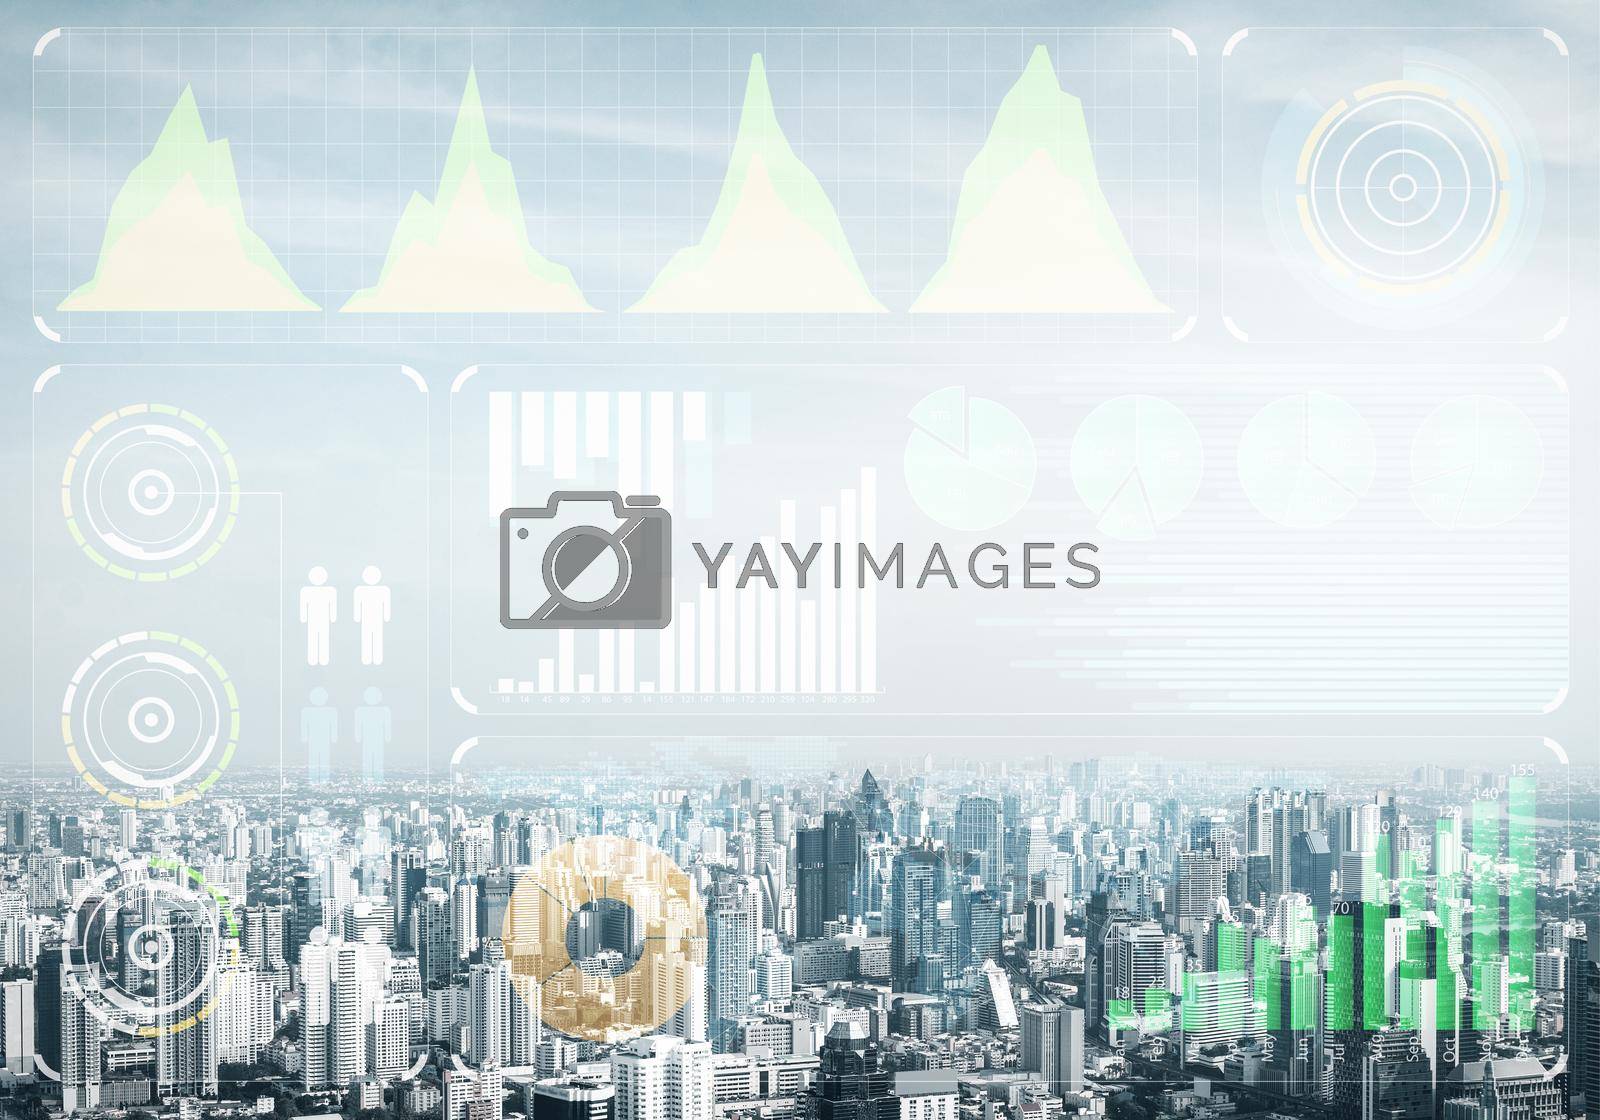 Double exposure business concept with abstract stock market data on background of modern cityscape. Virtual interface of online trading platform. Digital economic indexes, analytics and statistics.